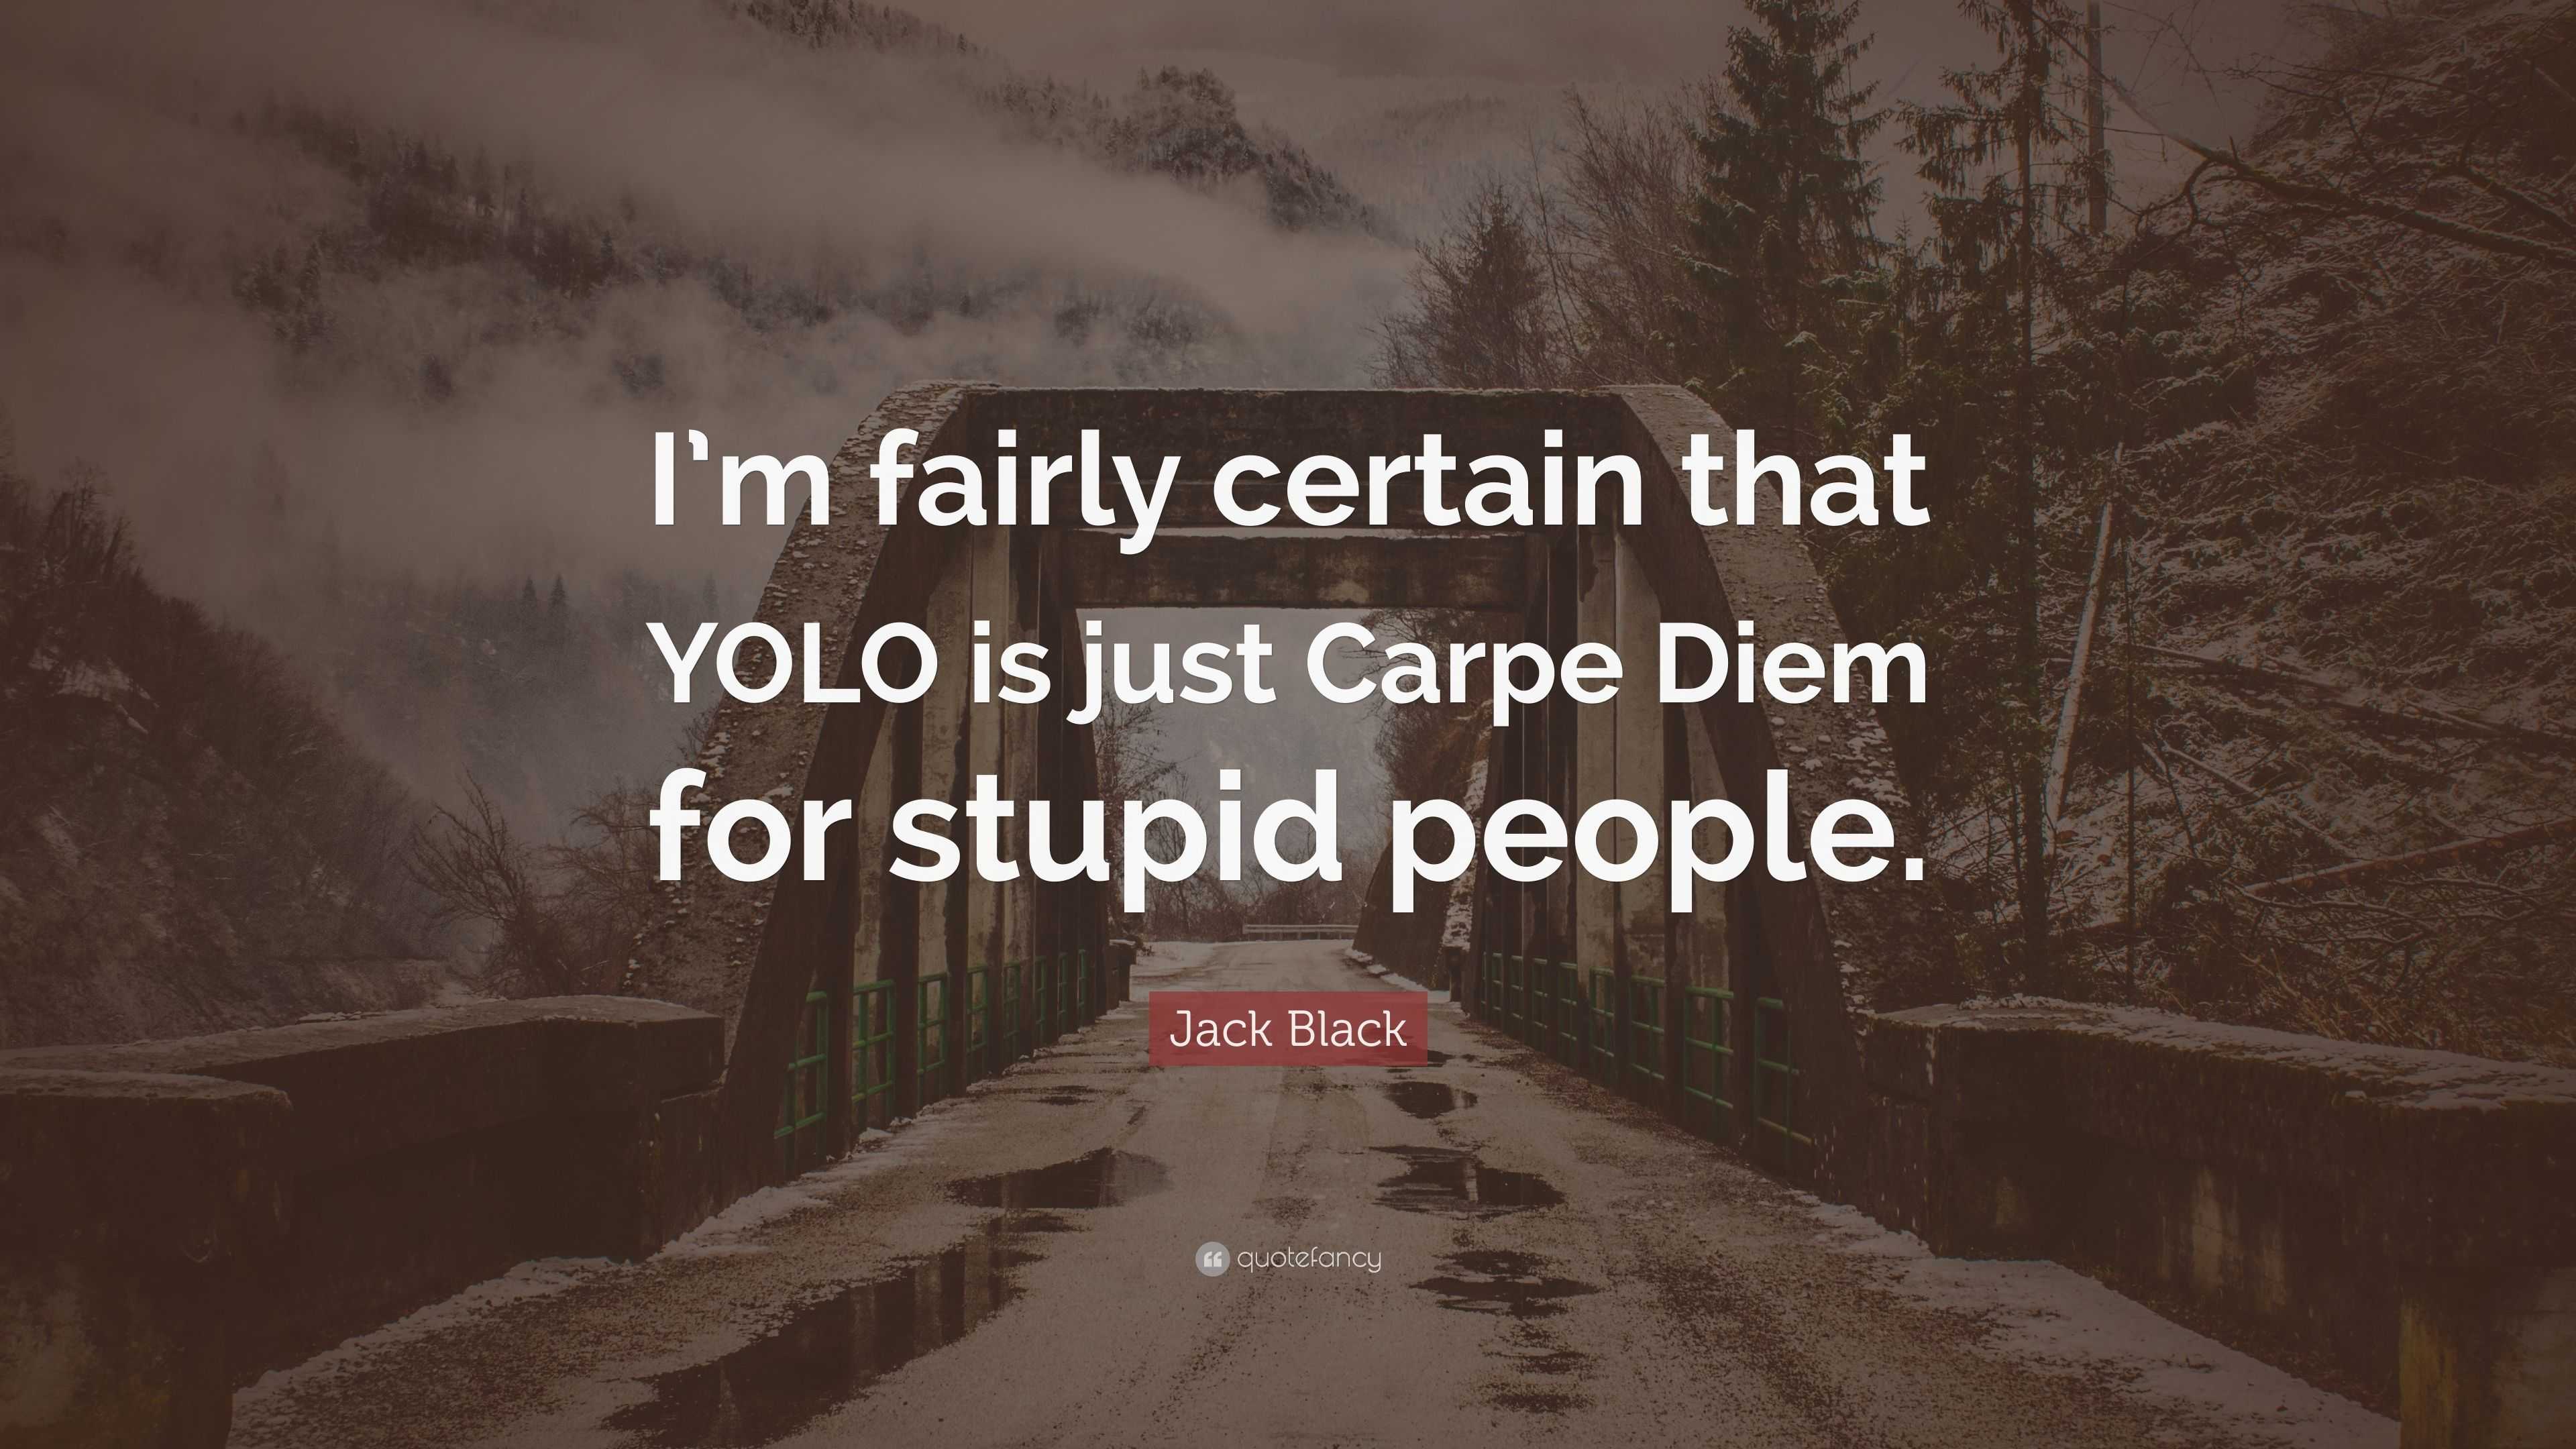 Jack Black Quote: "I'm fairly certain that YOLO is just Carpe Diem for stupid people." (7 ...